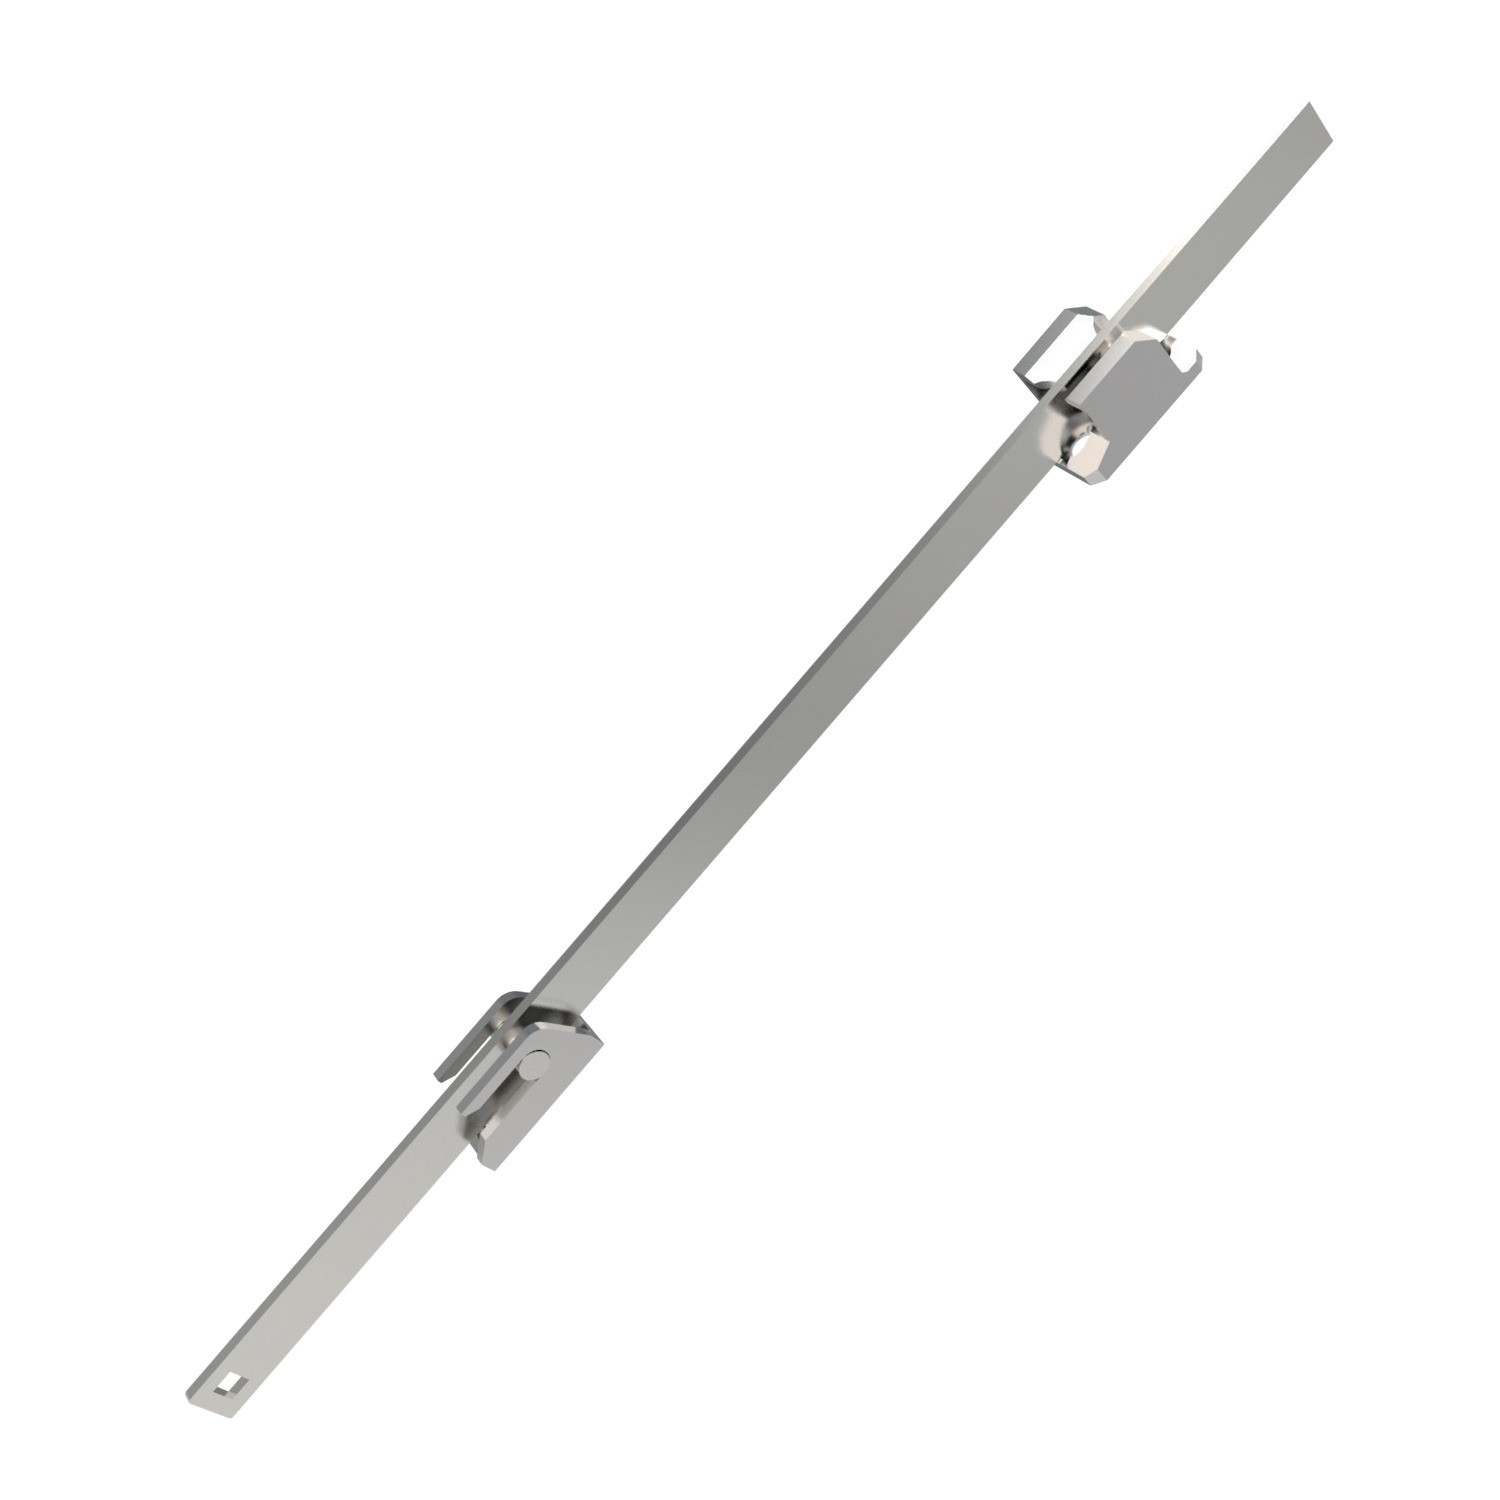 A0325.AW1070 Multi-Point Latching flat rod